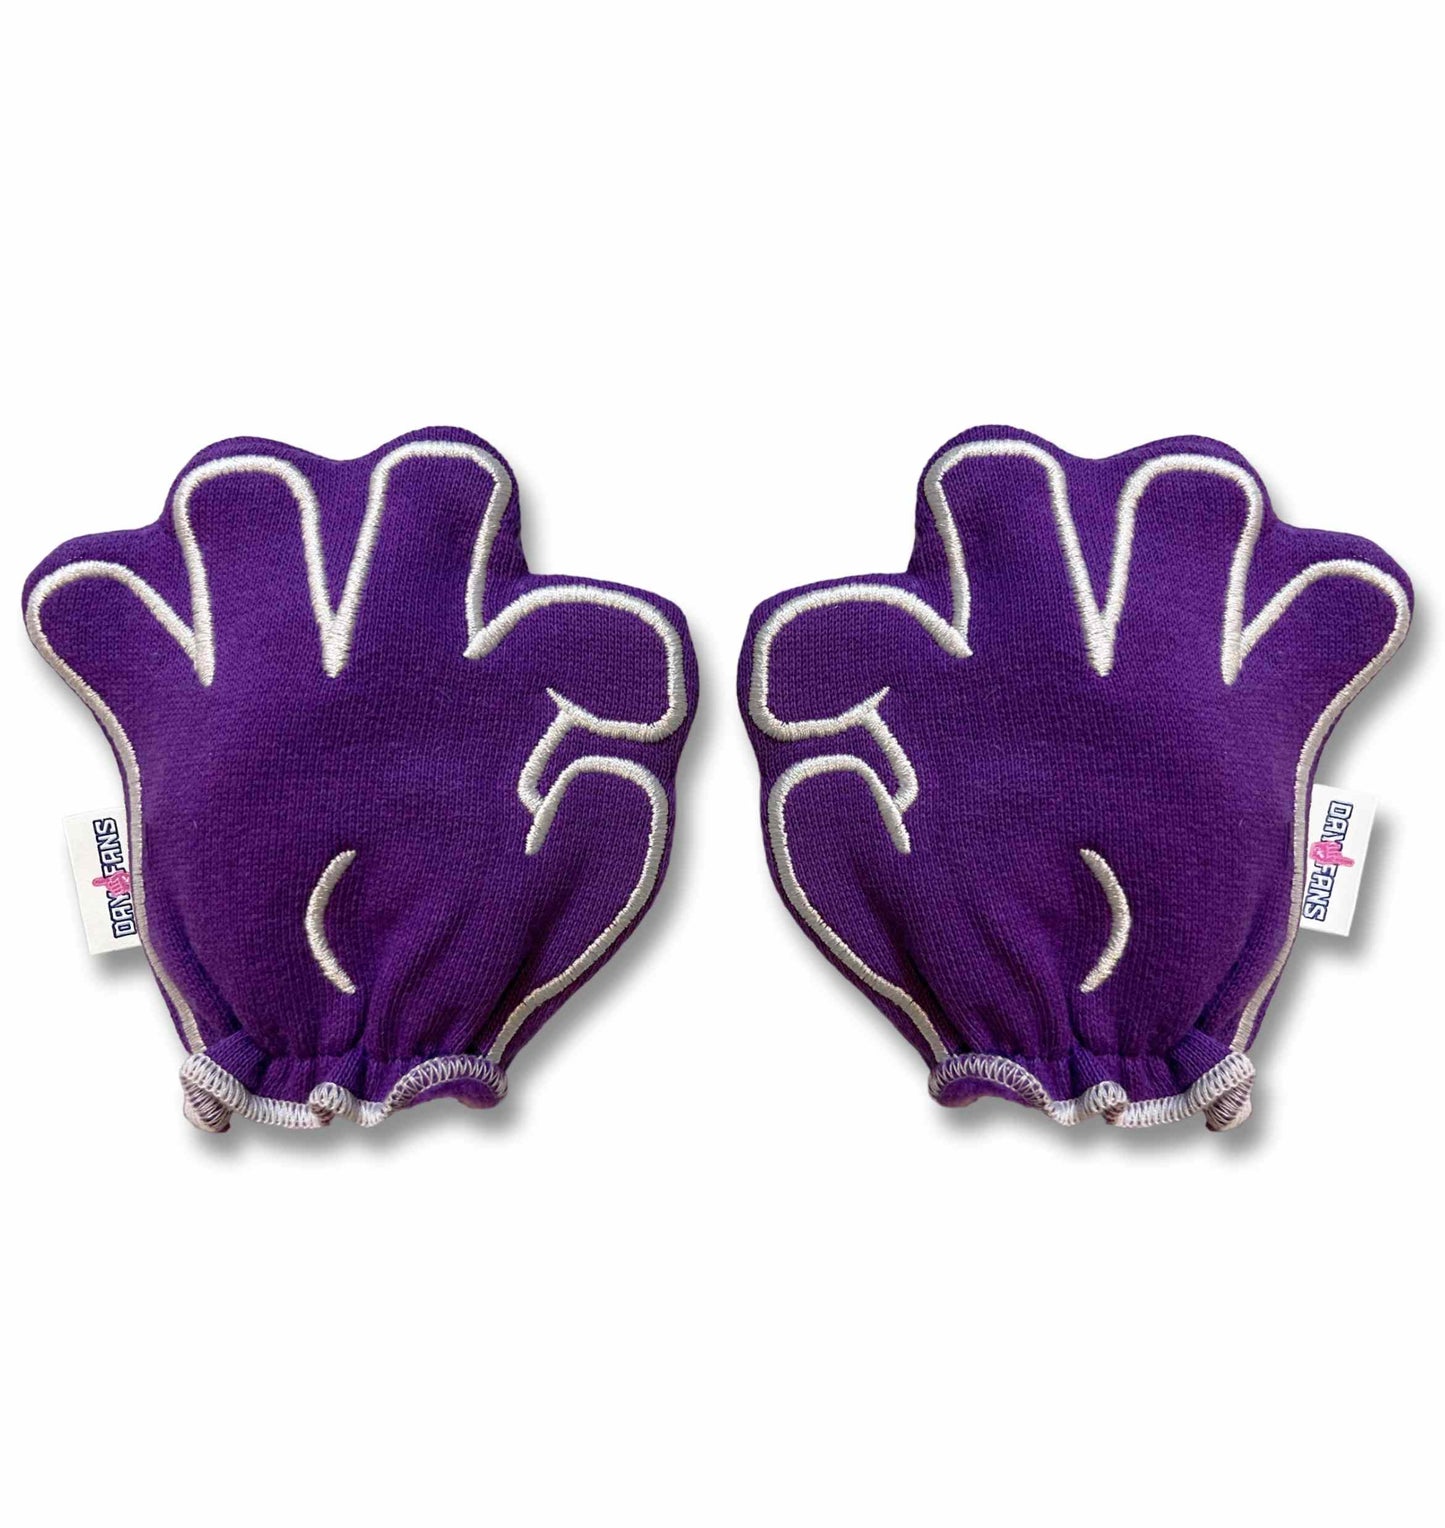 Kansas State Eat Em Up FanMitts Baby Mittens Purple Front Pair